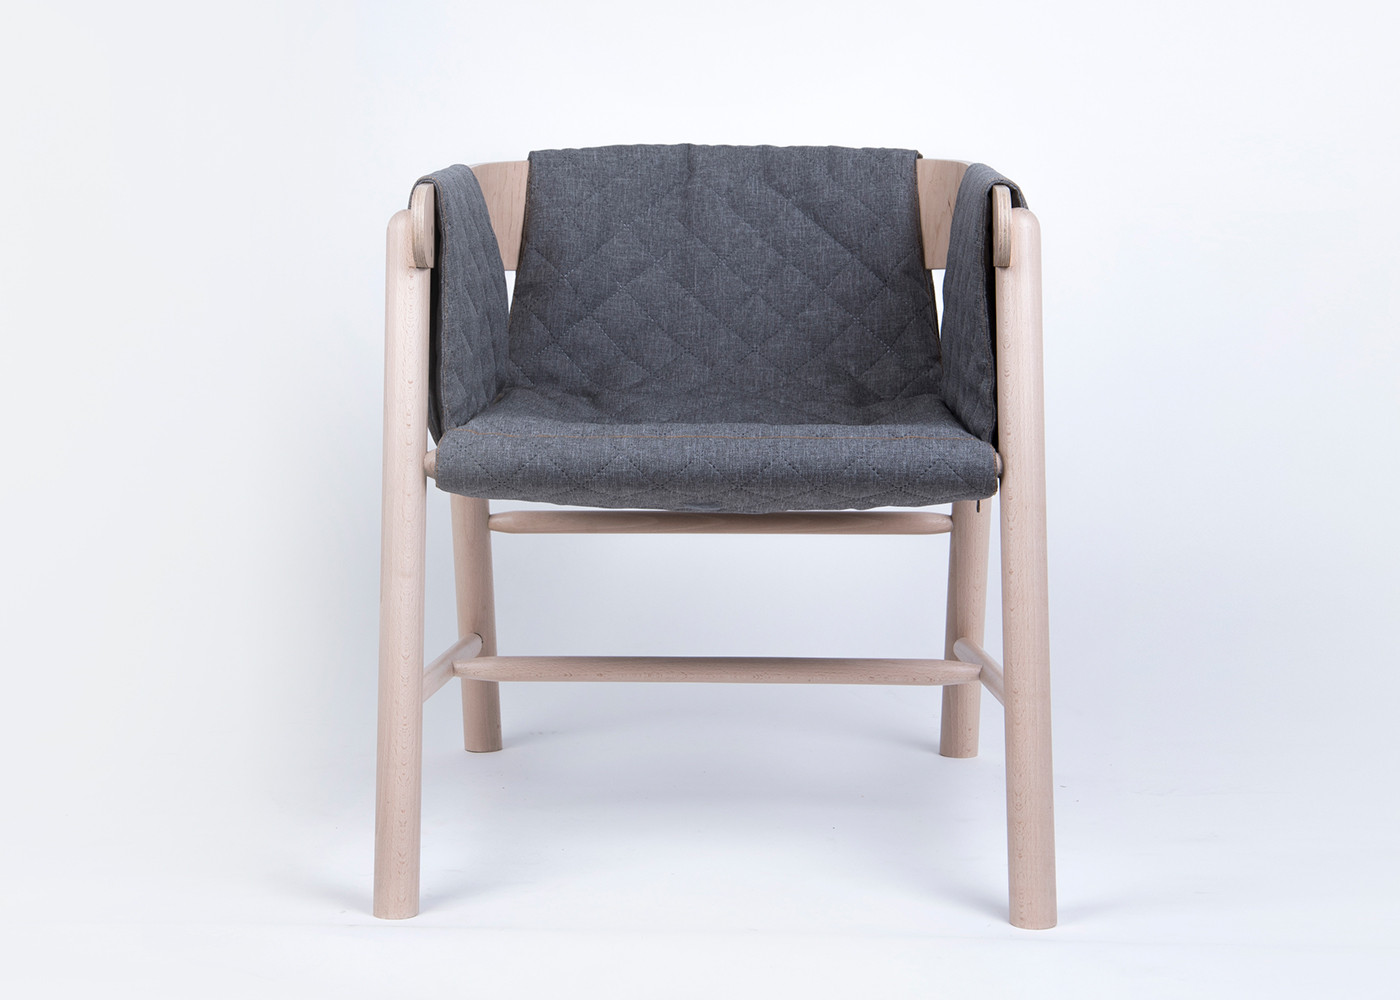 armchair upholstery natural grey Beech wood plywood furniture design